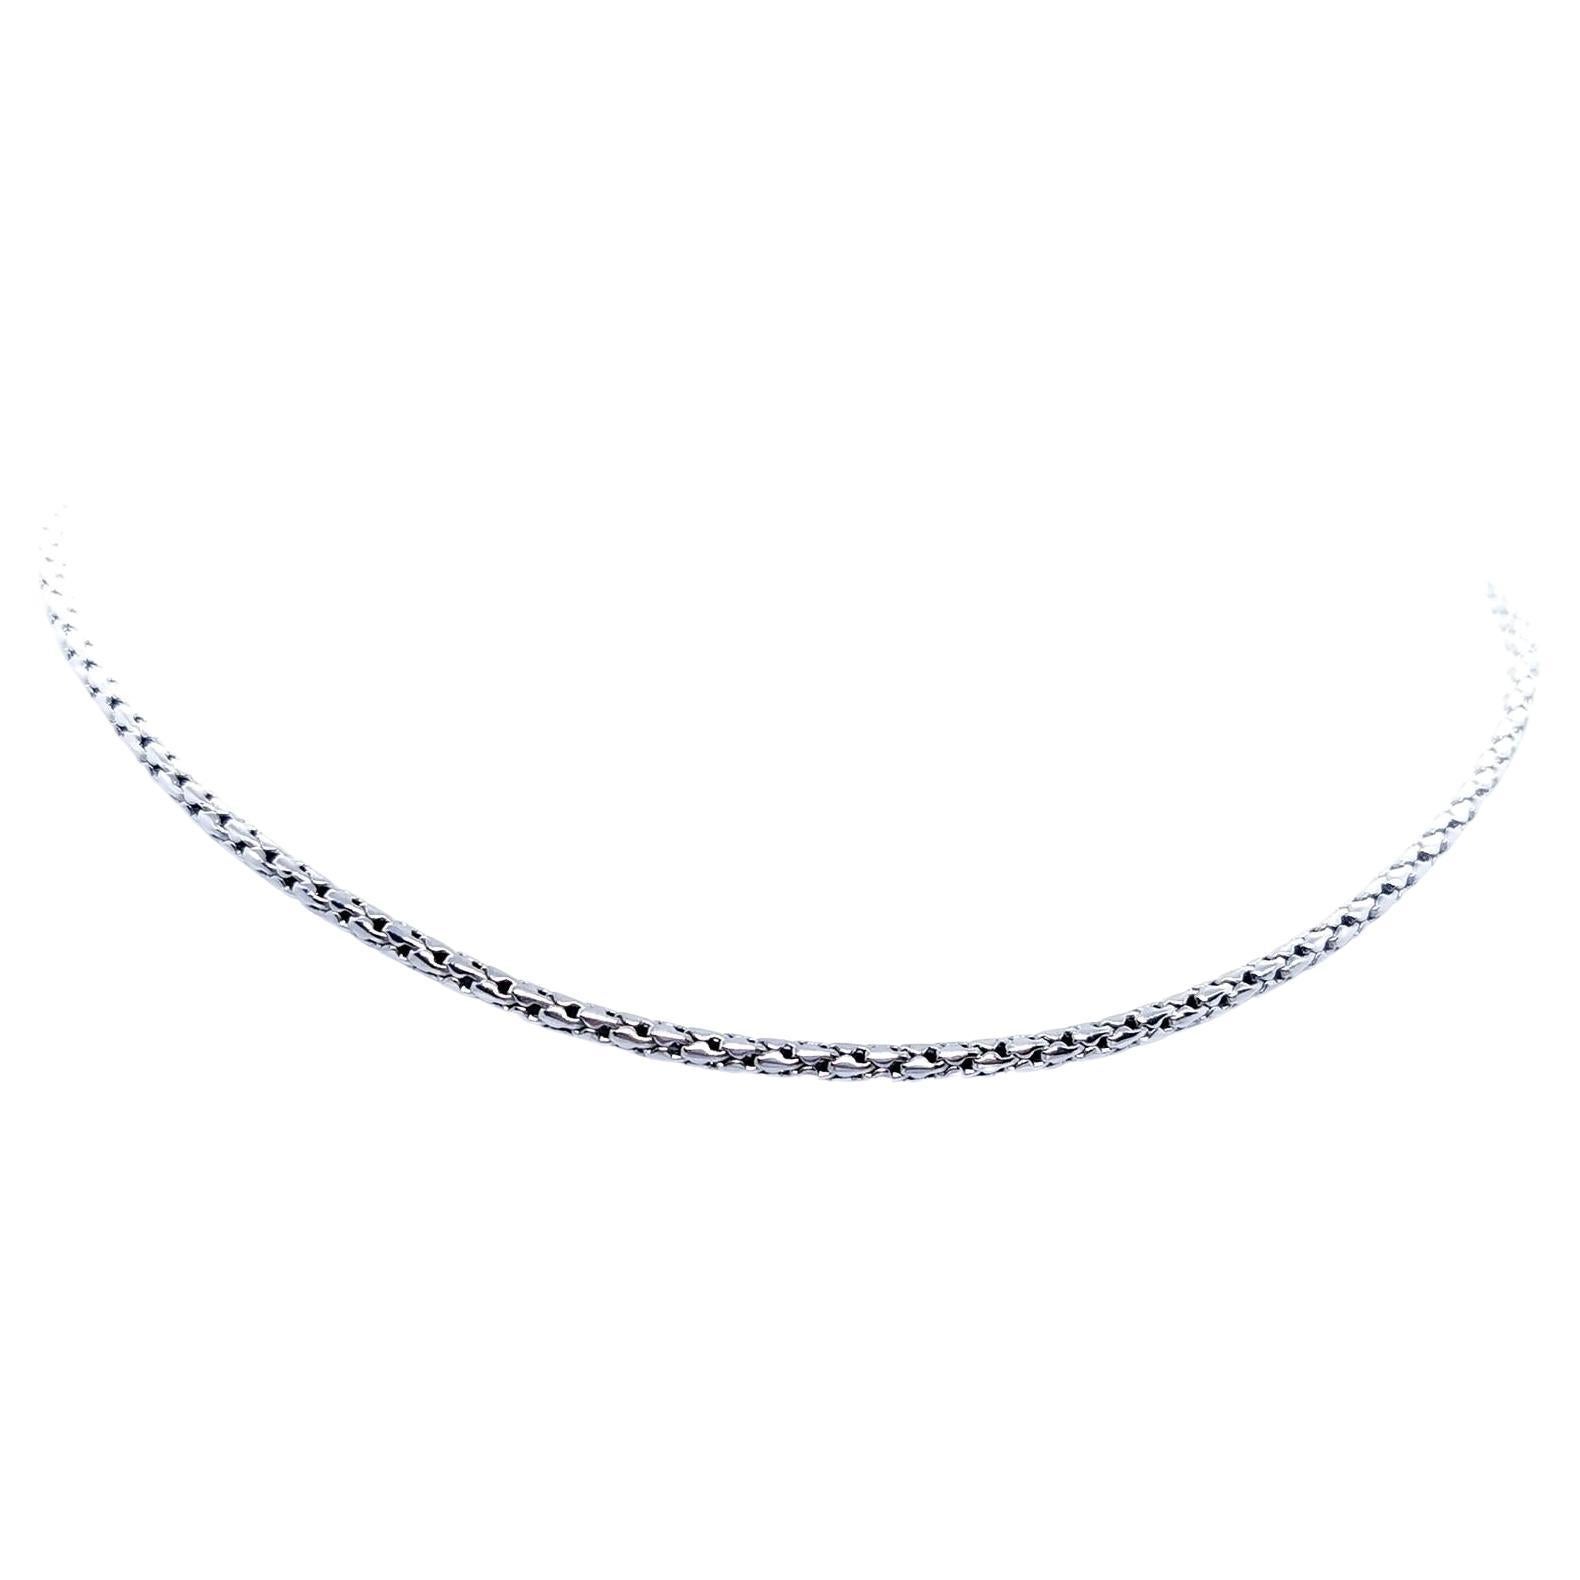 Chain Necklace White Gold For Sale